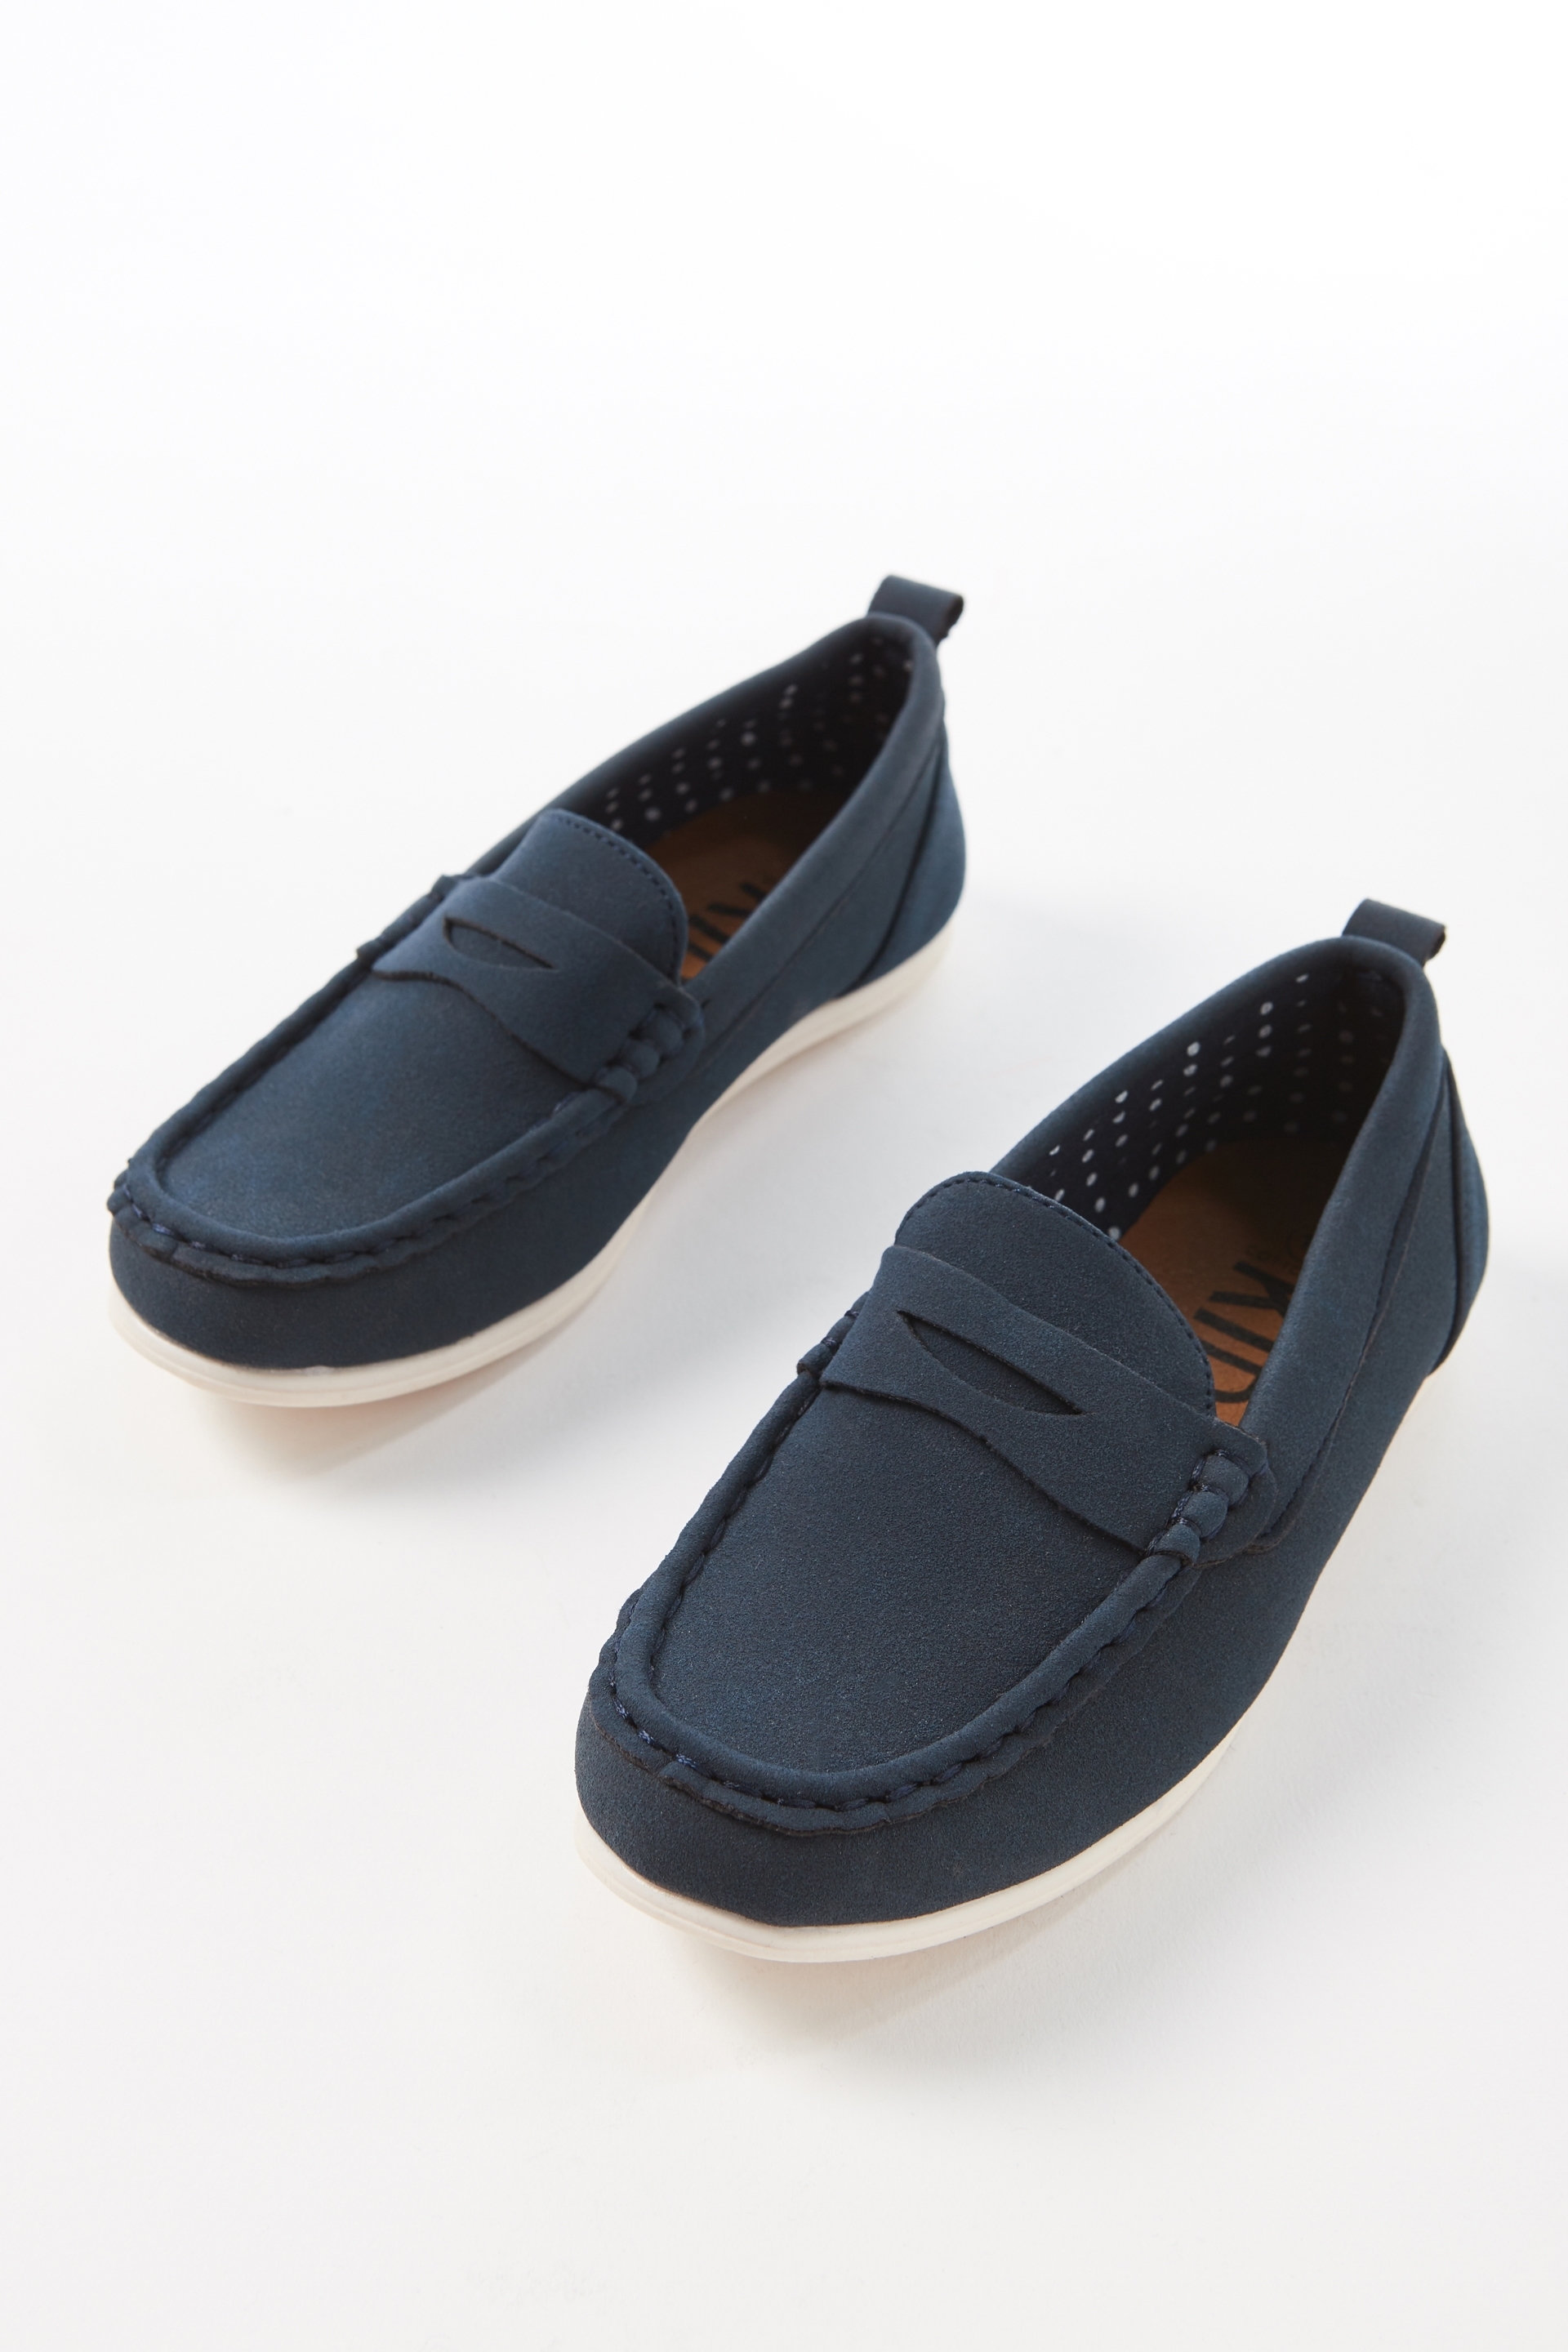 childrens navy blue dress shoes